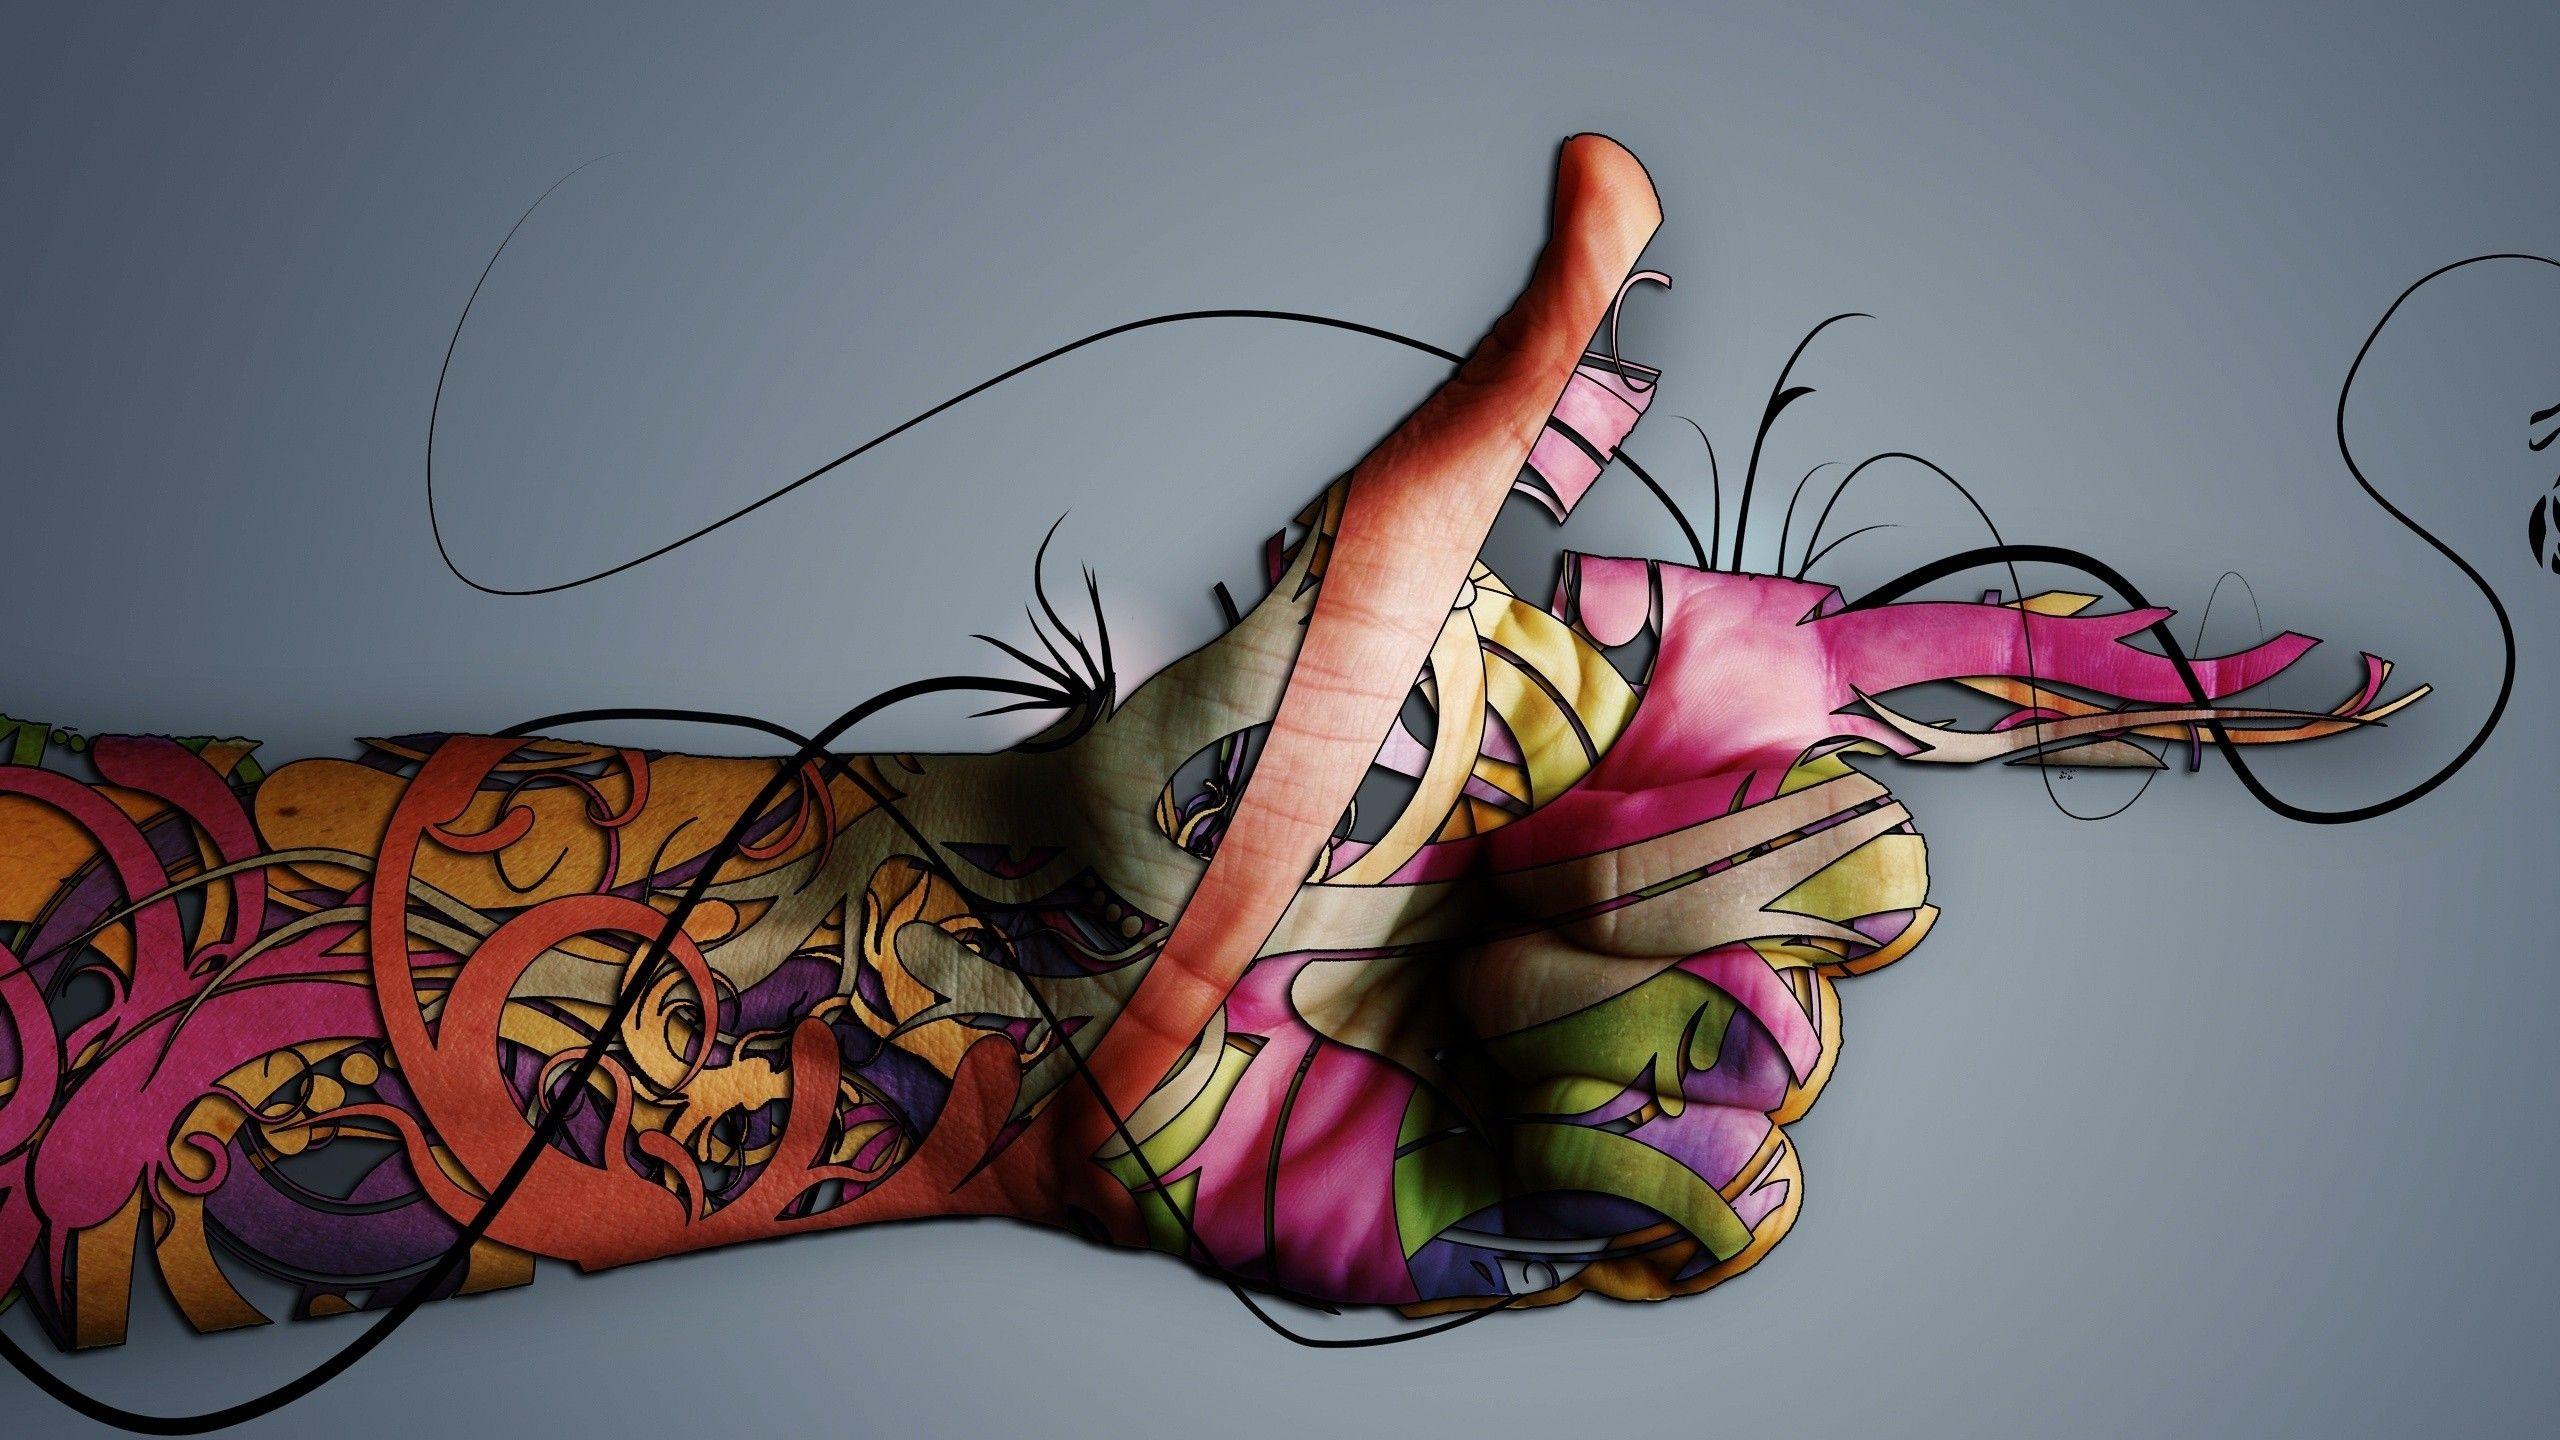 Hands artwork colors graphic wallpapers